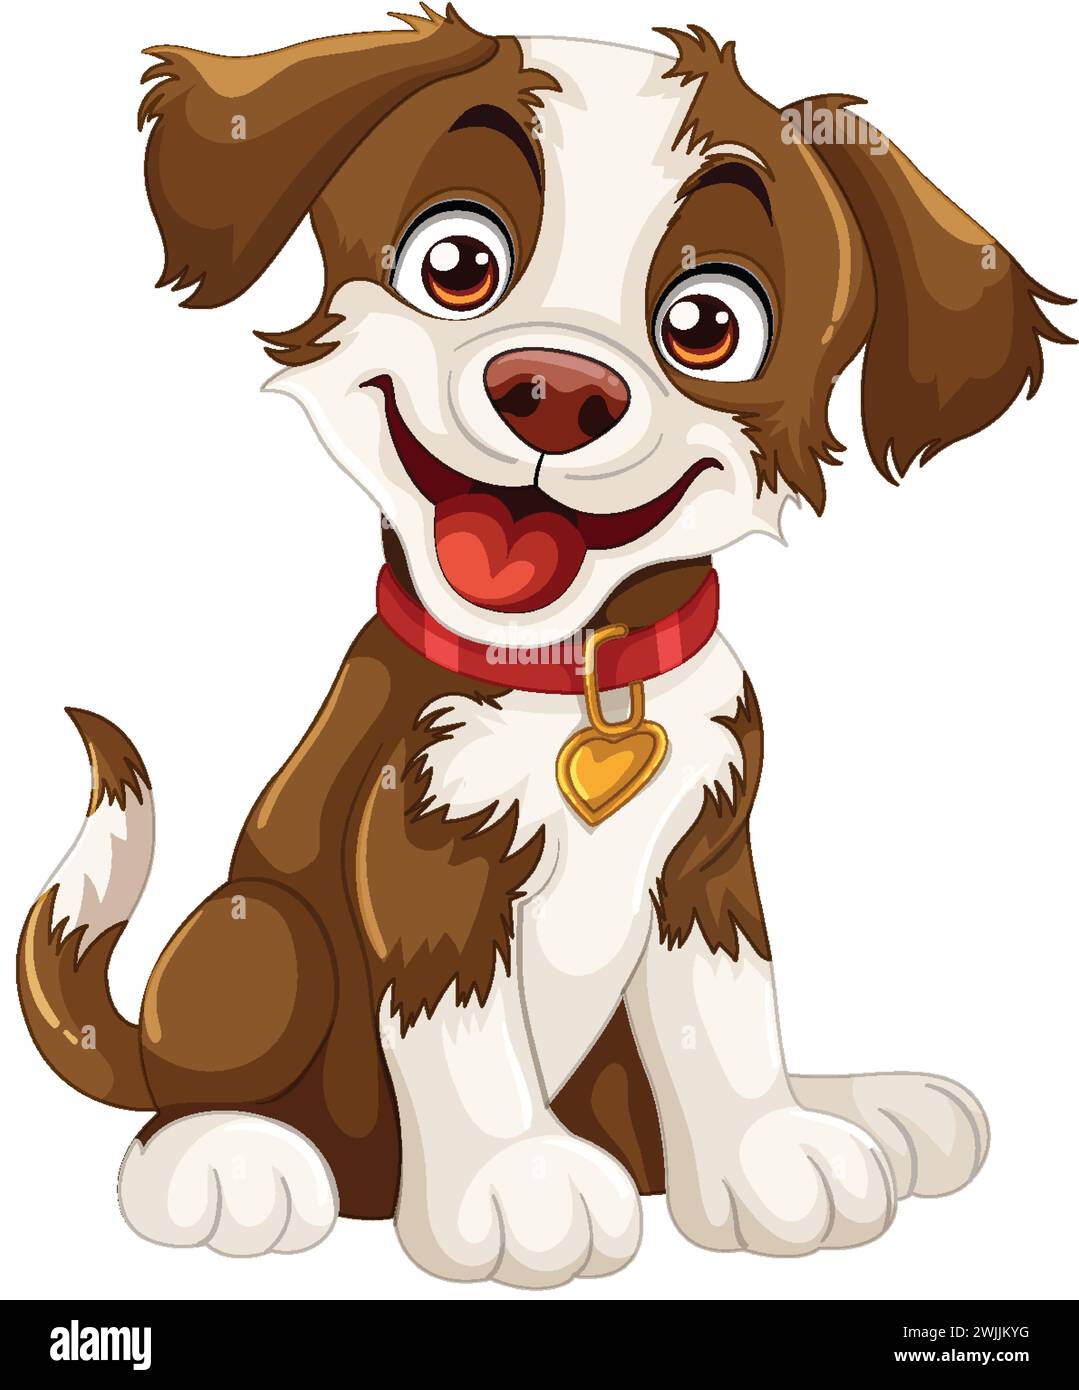 A cheerful cartoon dog sitting with a red collar Stock Vector